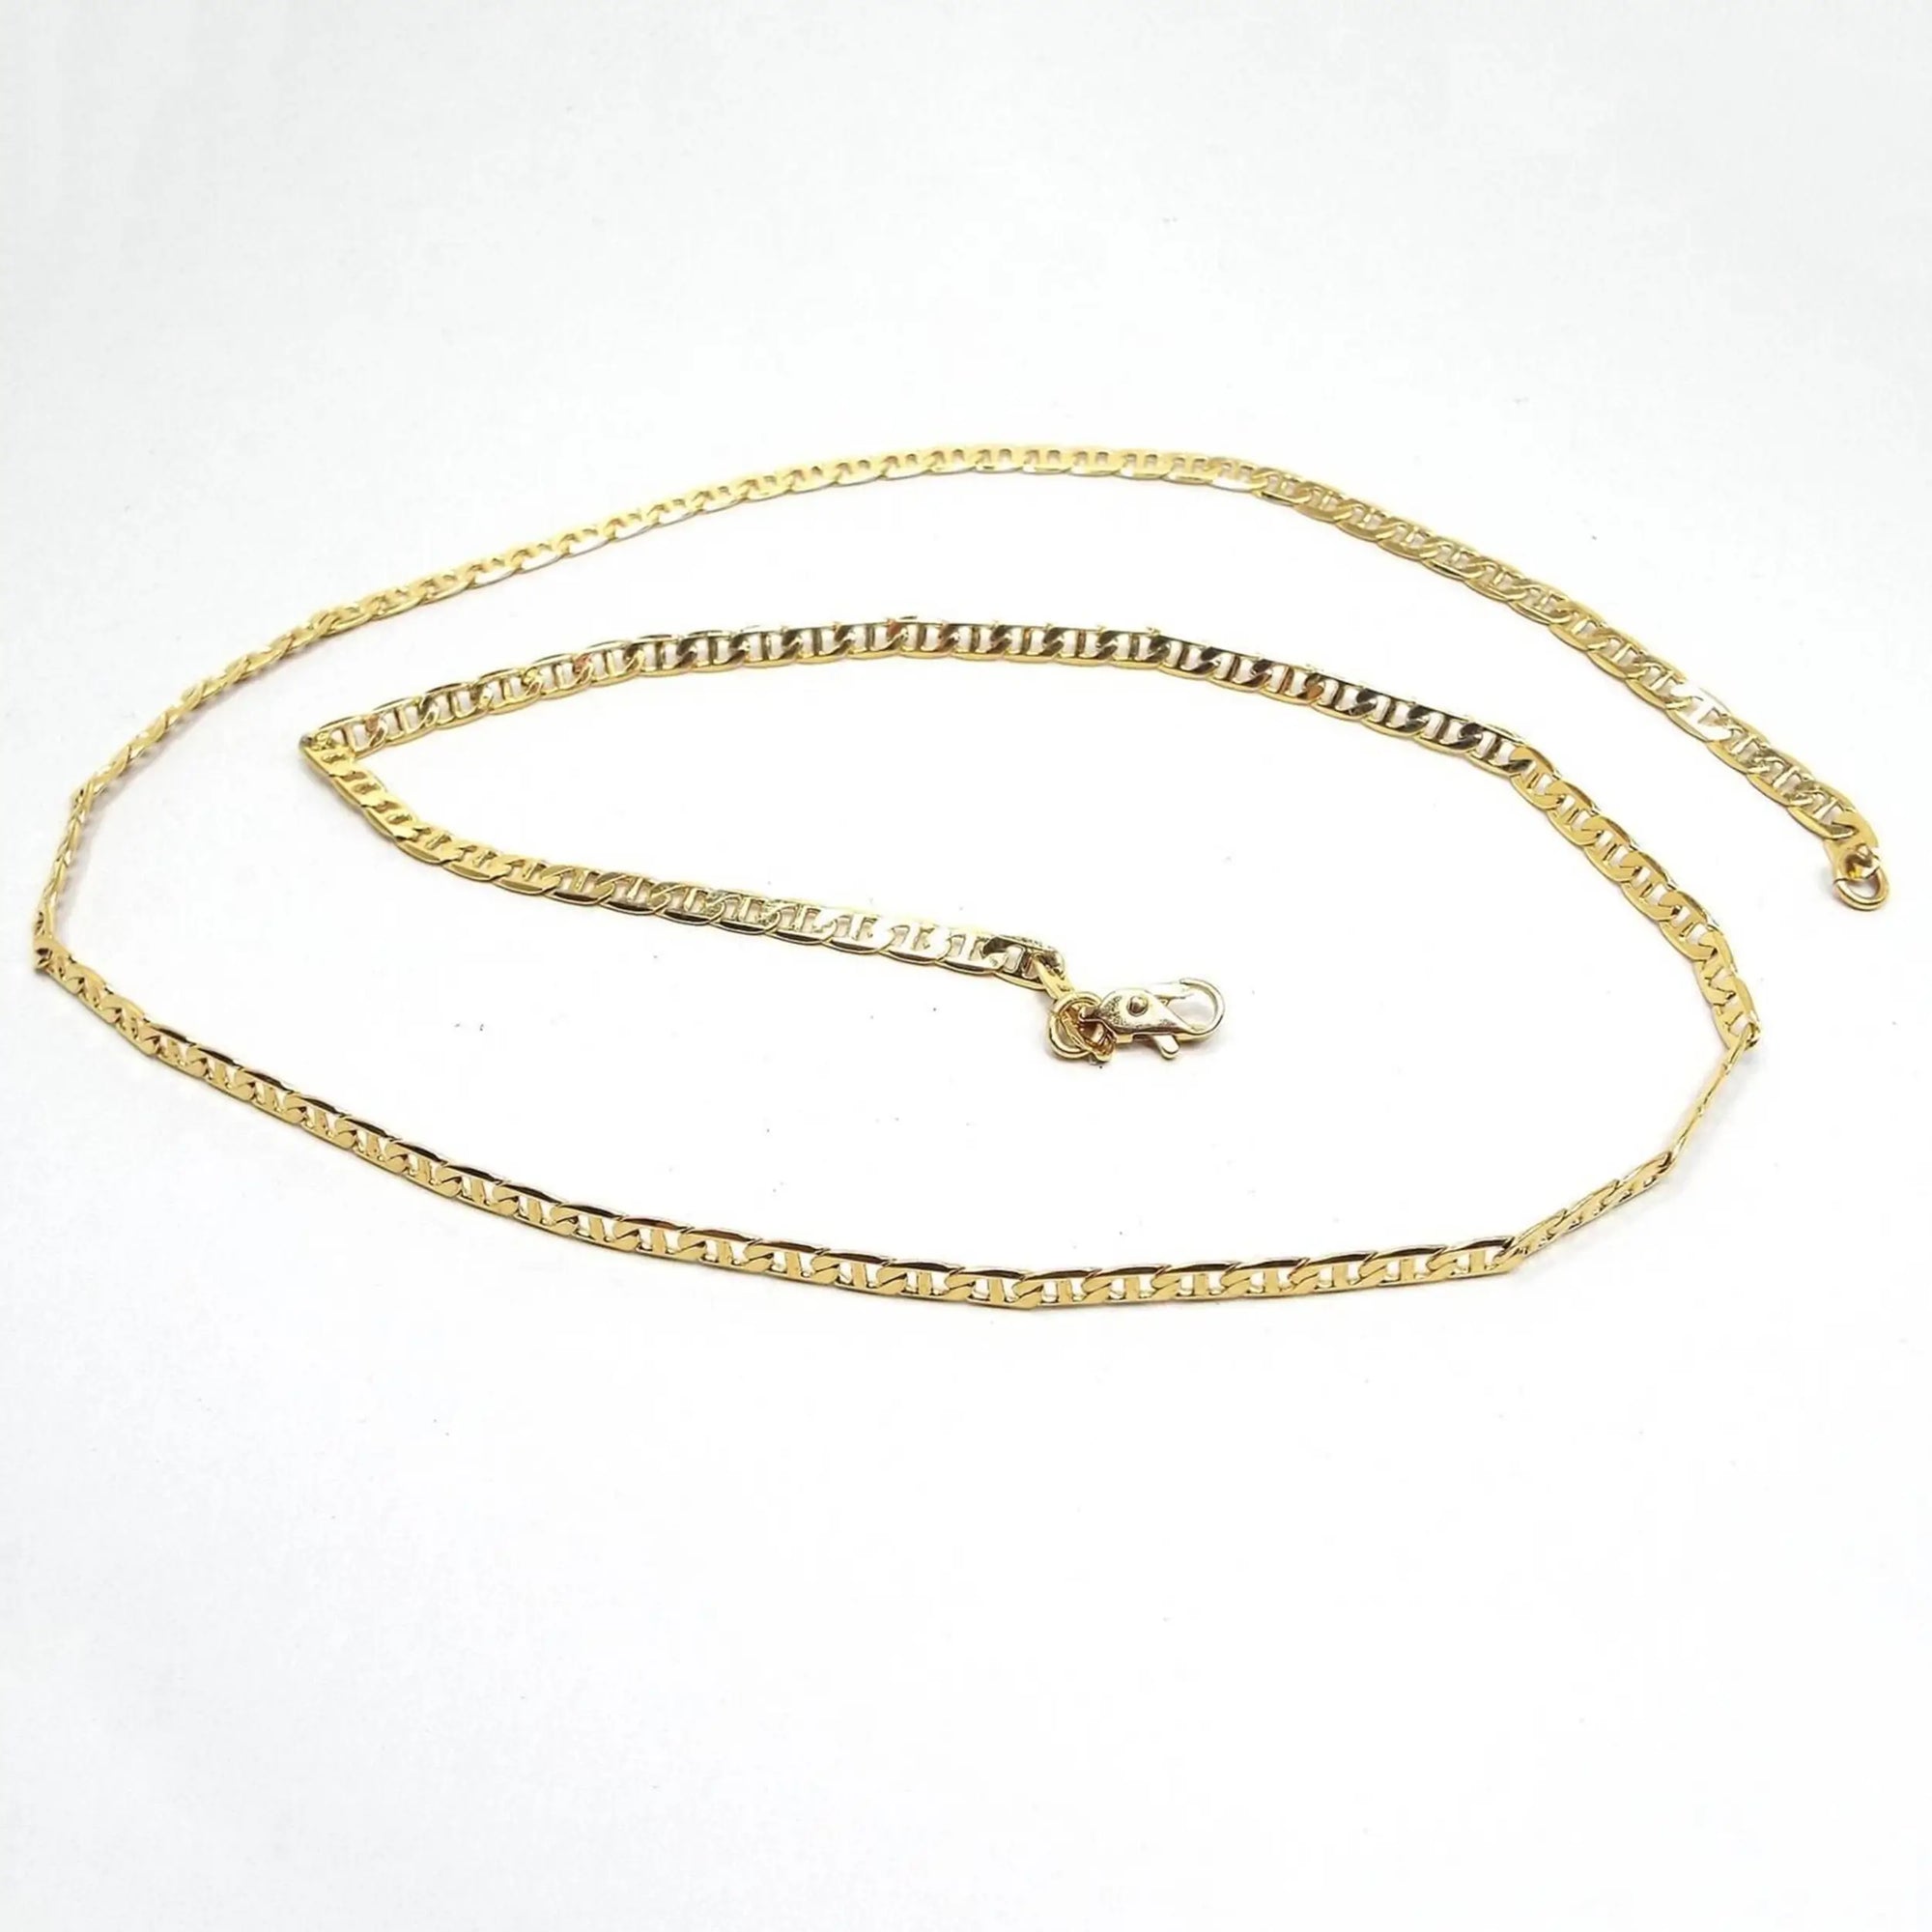 Top view of the retro vintage chain linke necklace. The mariner chain links are gold tone in color. There is a small lobster claw clasp at the end.